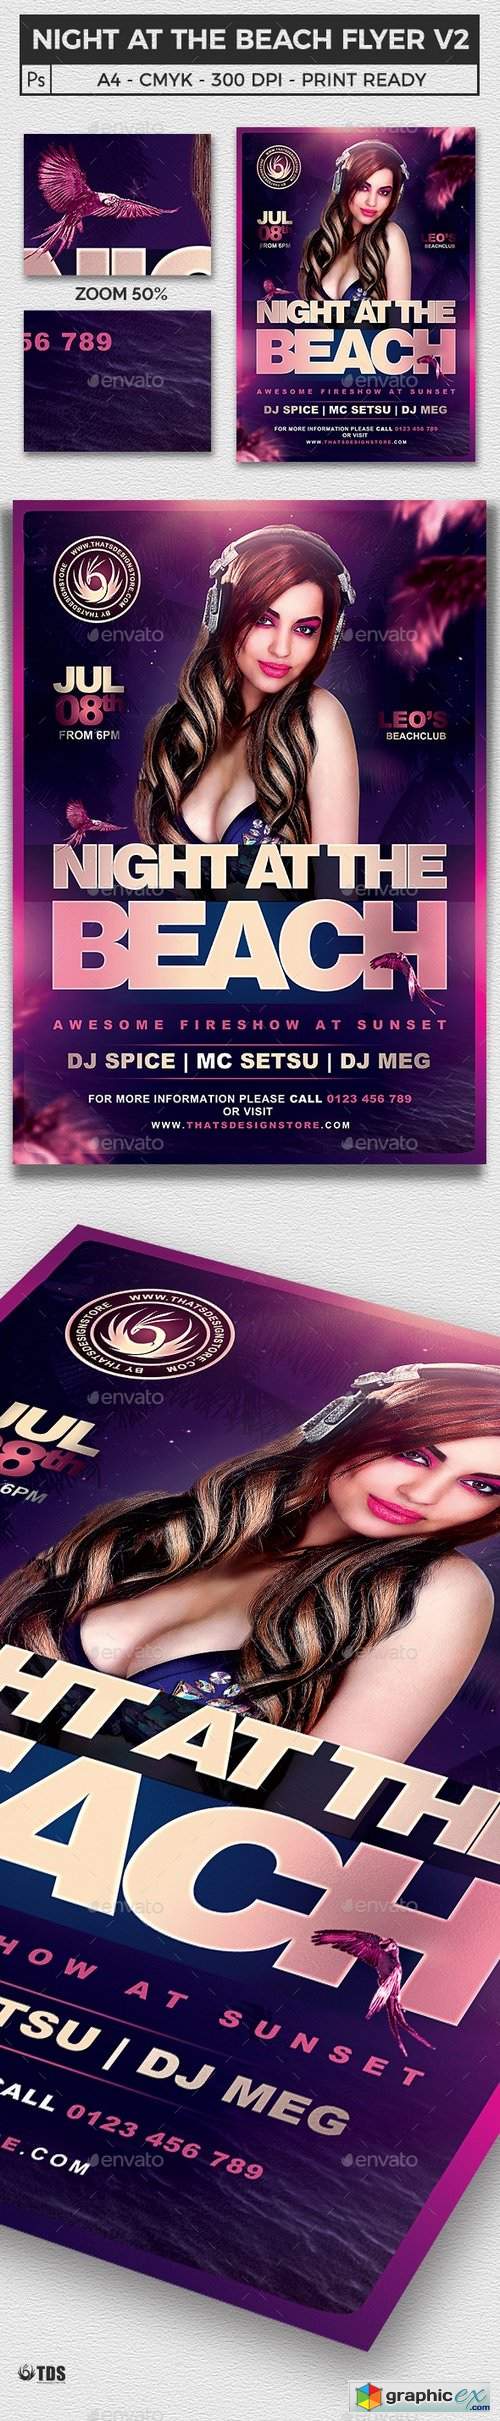 Night at the Beach Flyer Template V2